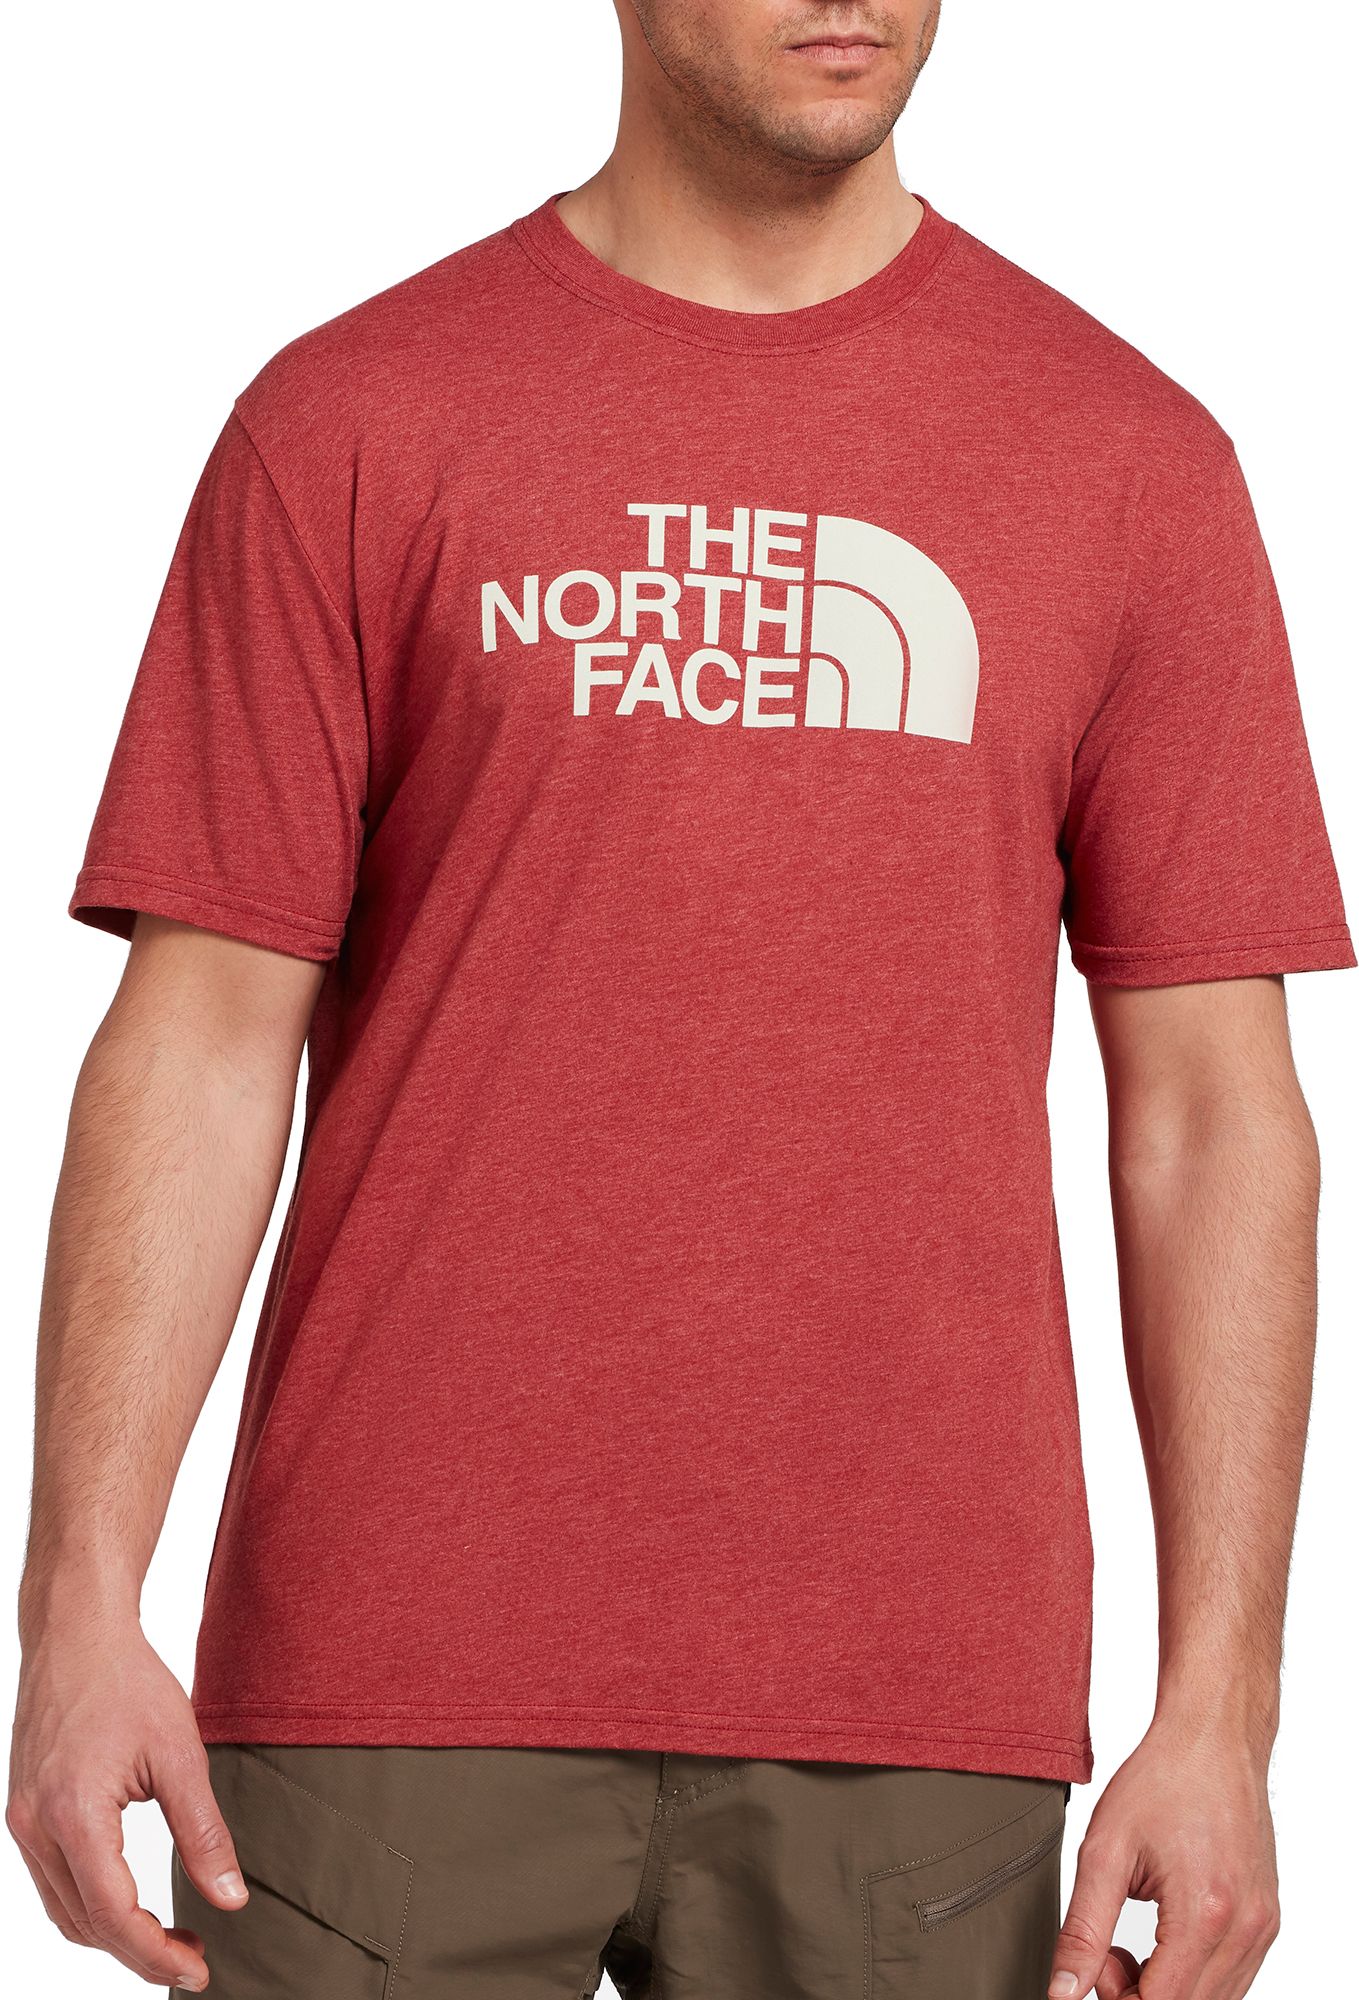 The North Face Men's Half Dome T-Shirt - .97 - .97